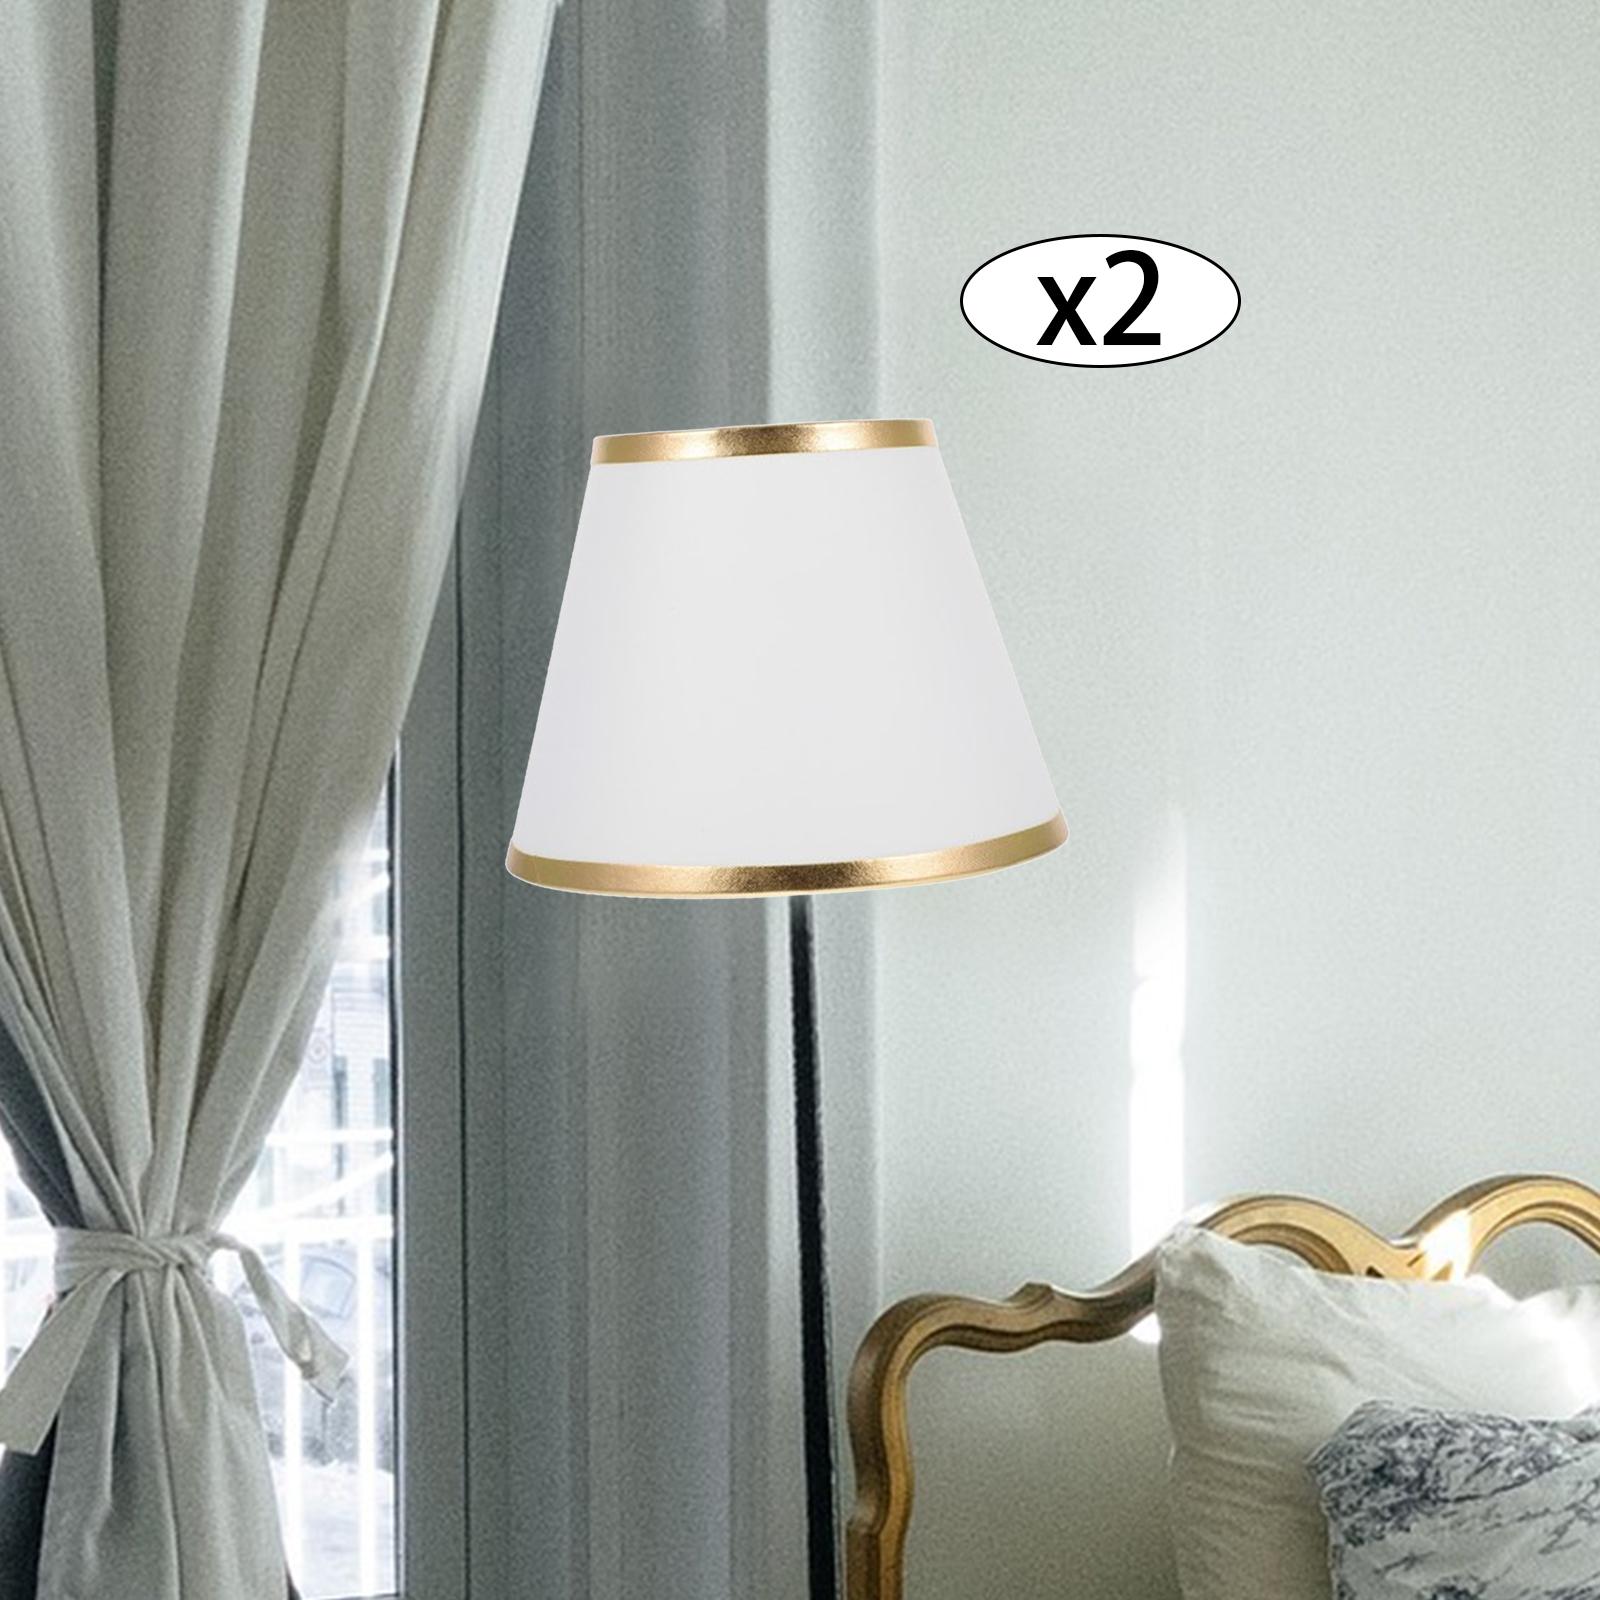 Imitation Cloth Lamp Shade Hollow Out Clip On Hanging Light Lamp Cover White